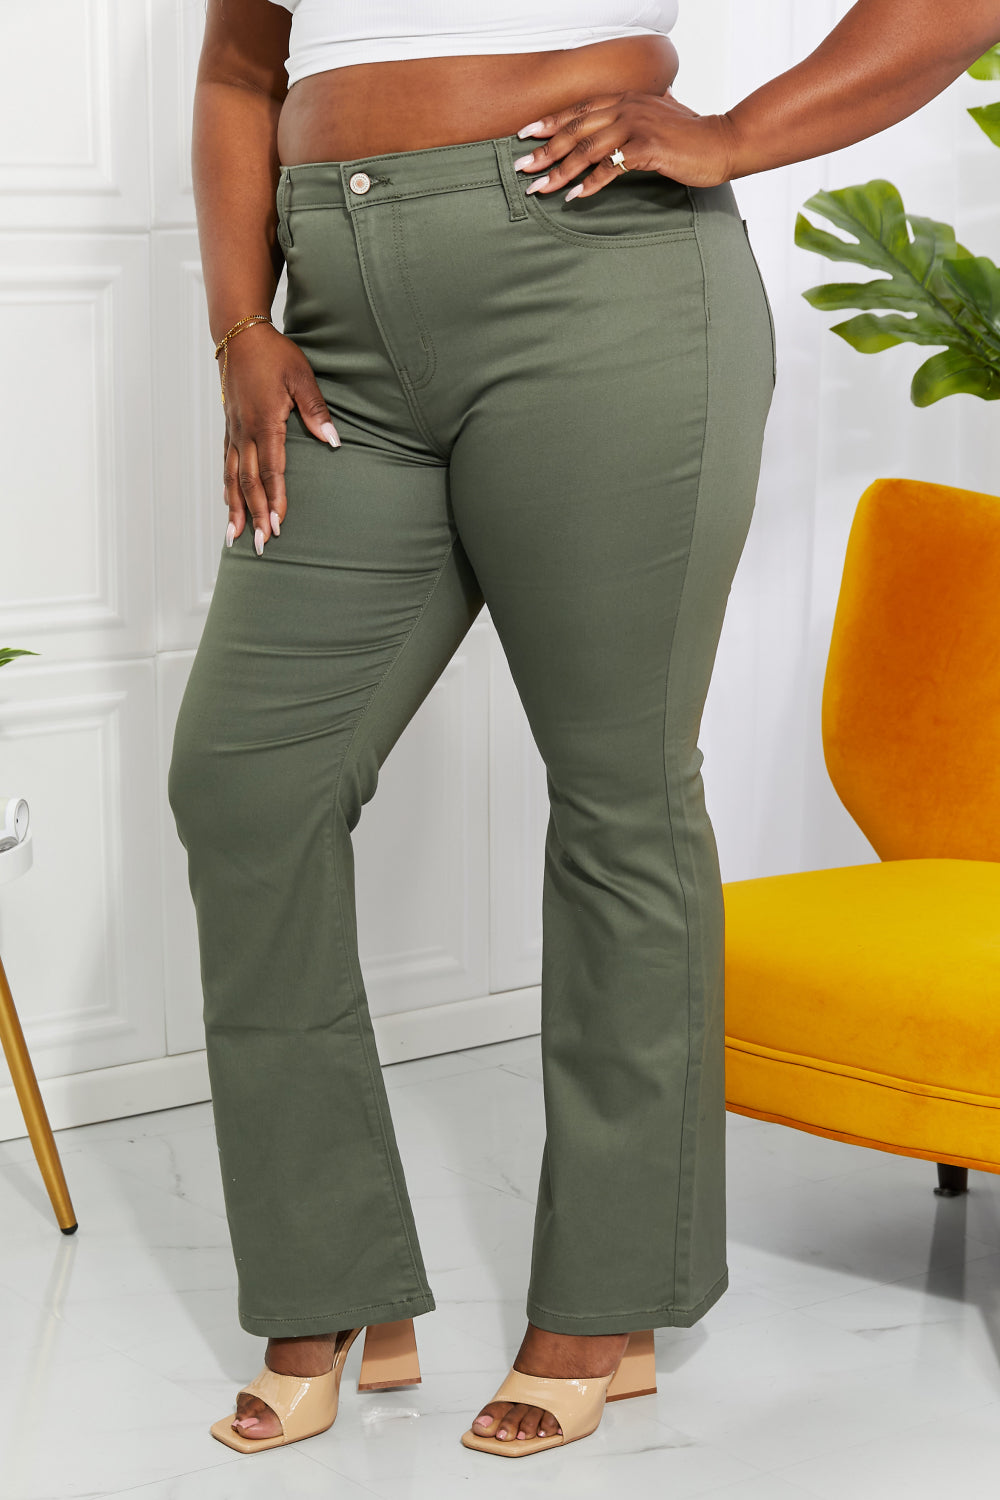 Zenana Clementine High-Rise Bootcut Jeans in Olive - Online Only